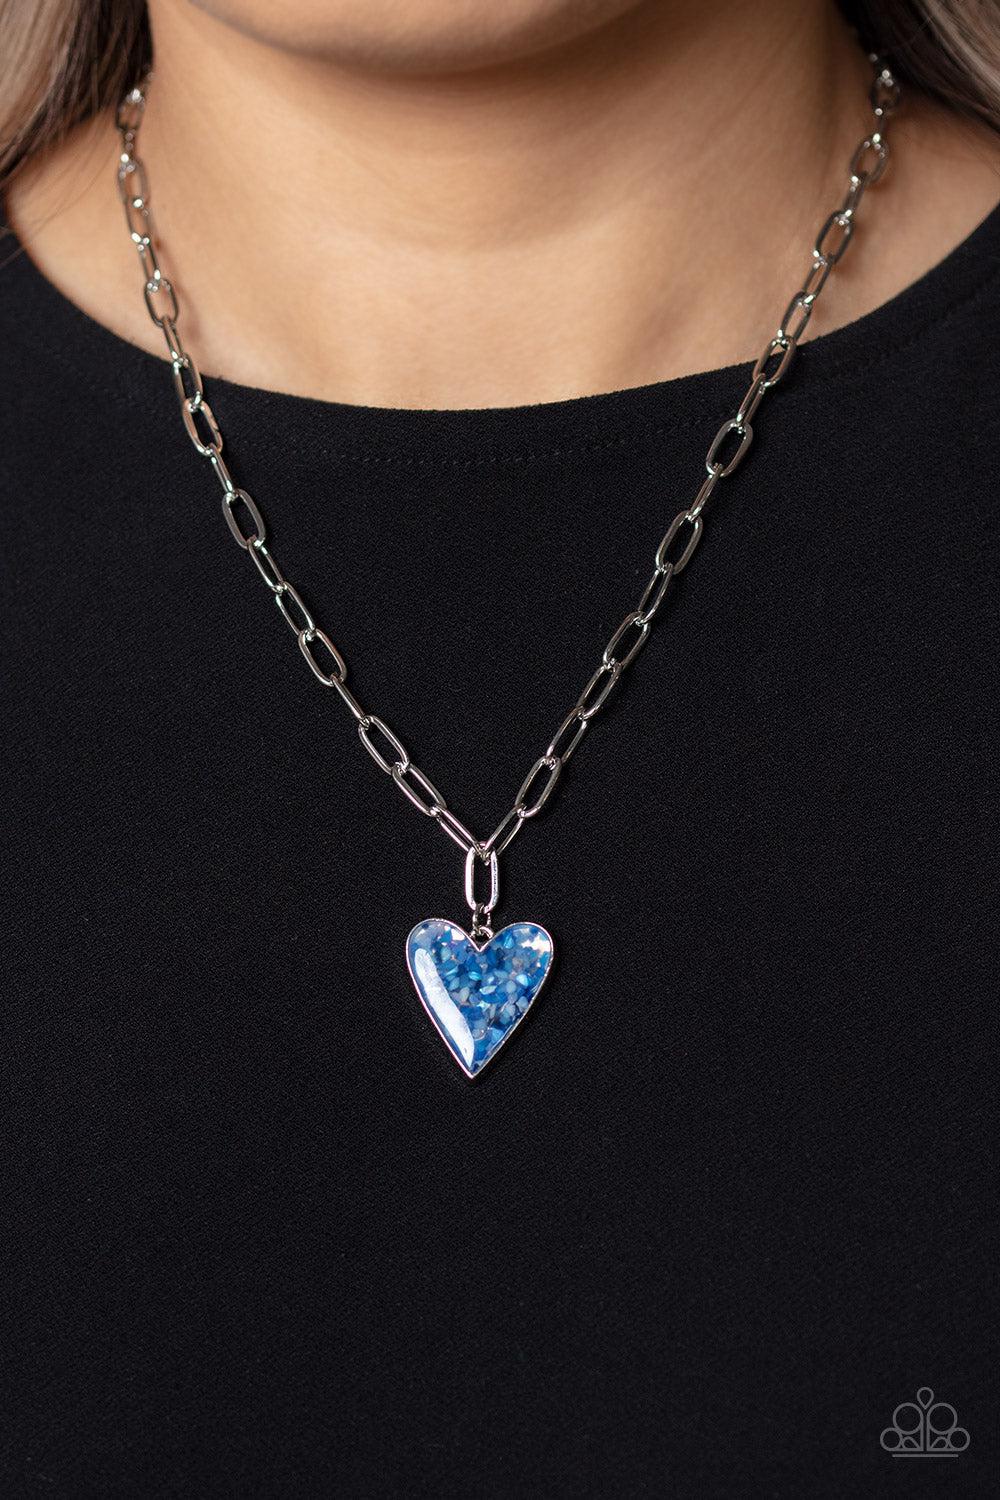 Kiss and SHELL Blue Heart Necklace - Paparazzi Accessories-on model - CarasShop.com - $5 Jewelry by Cara Jewels